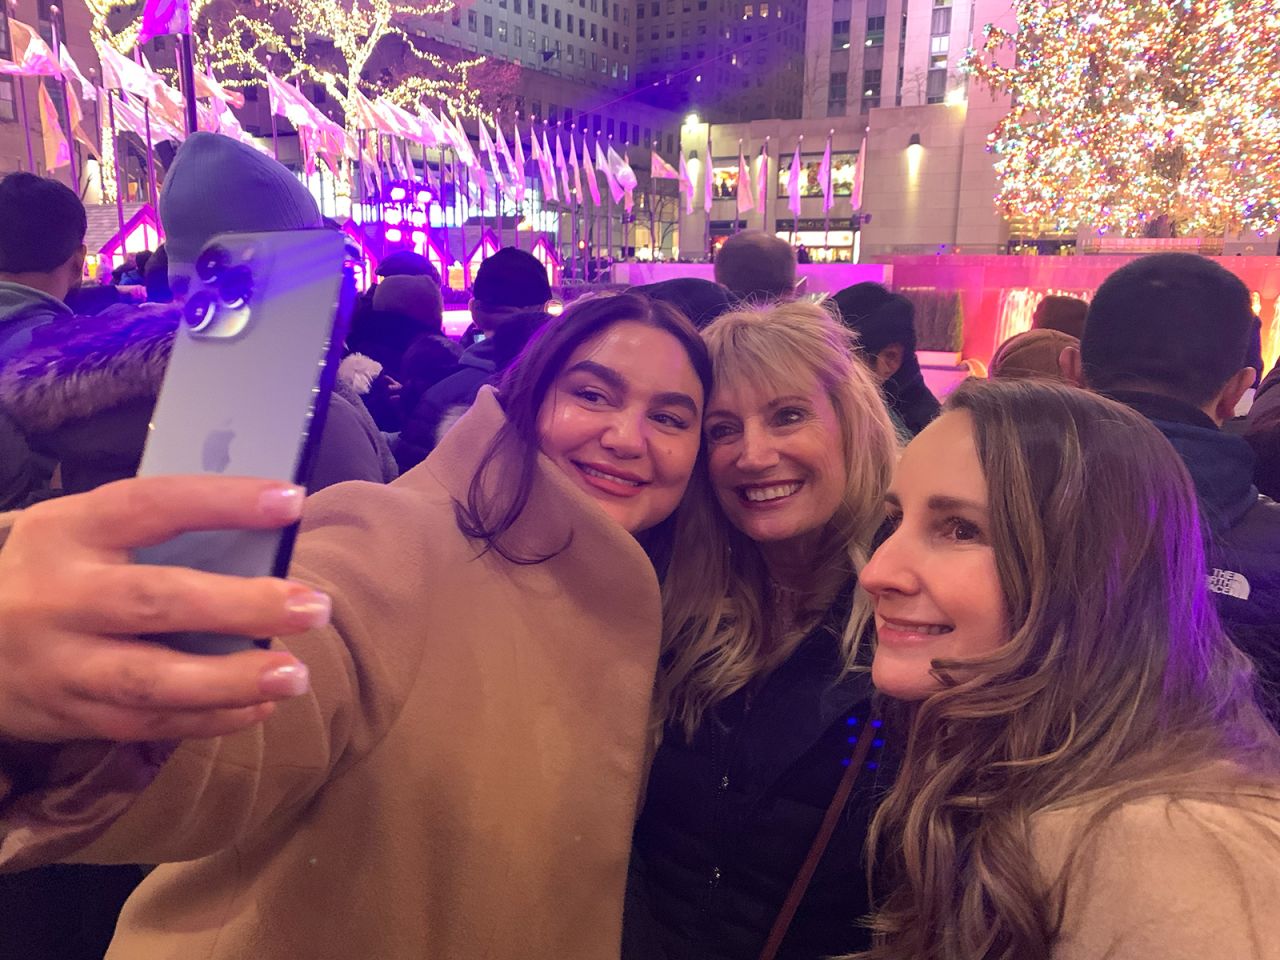 The trio snap a selfie Saturday night at Rockefeller Center in New York.